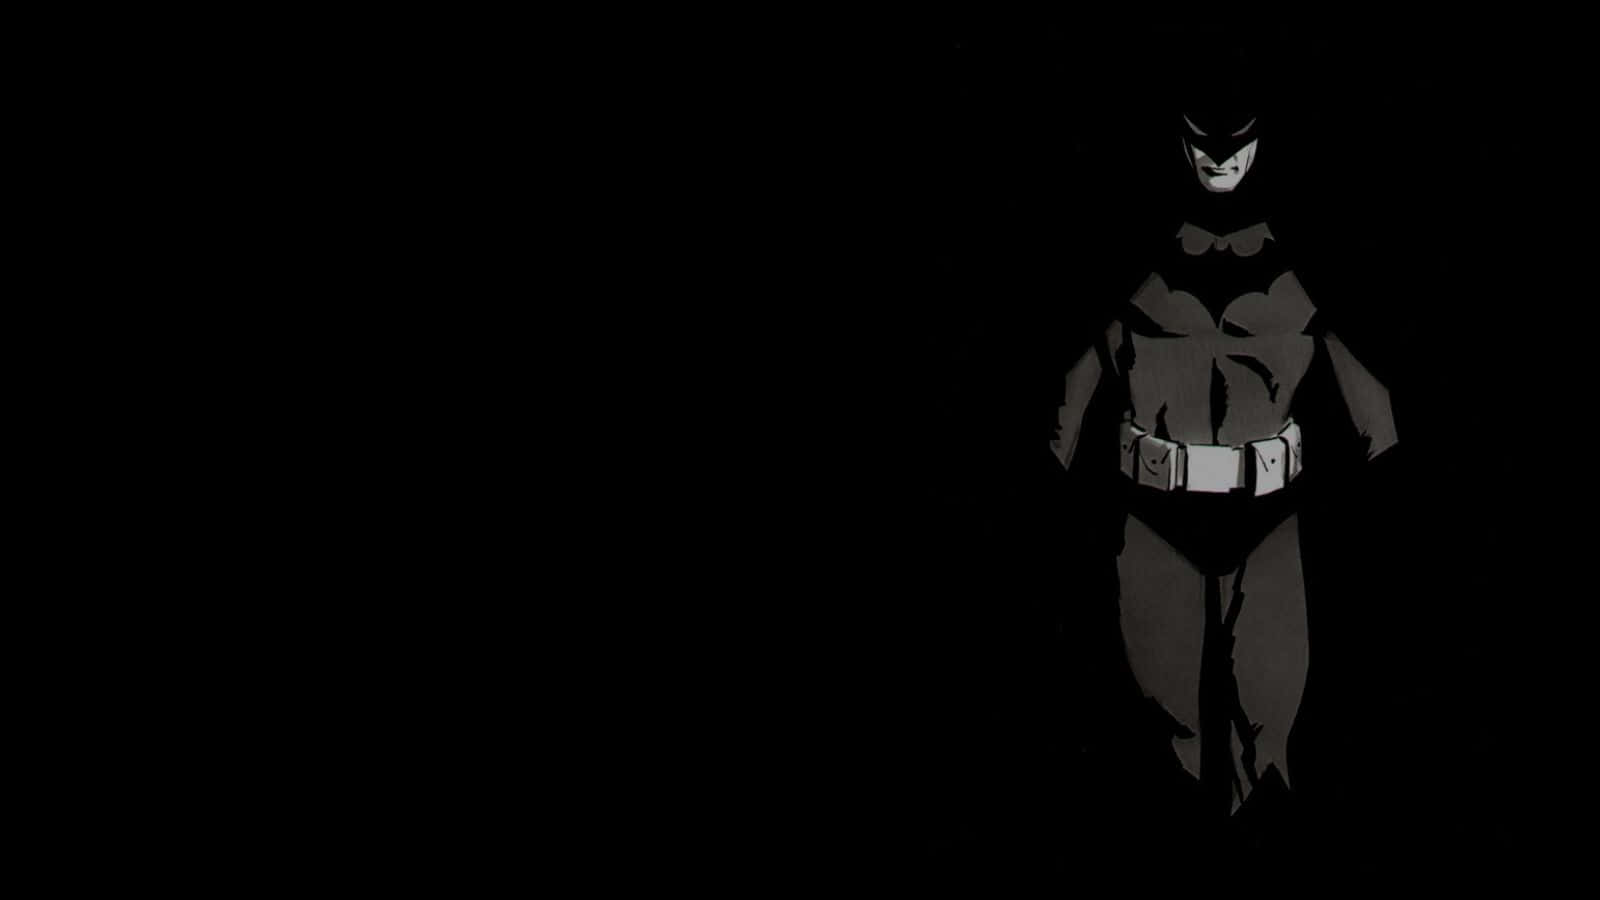 The Mysterious Shadow of the Bat Looms in the Night Sky Wallpaper